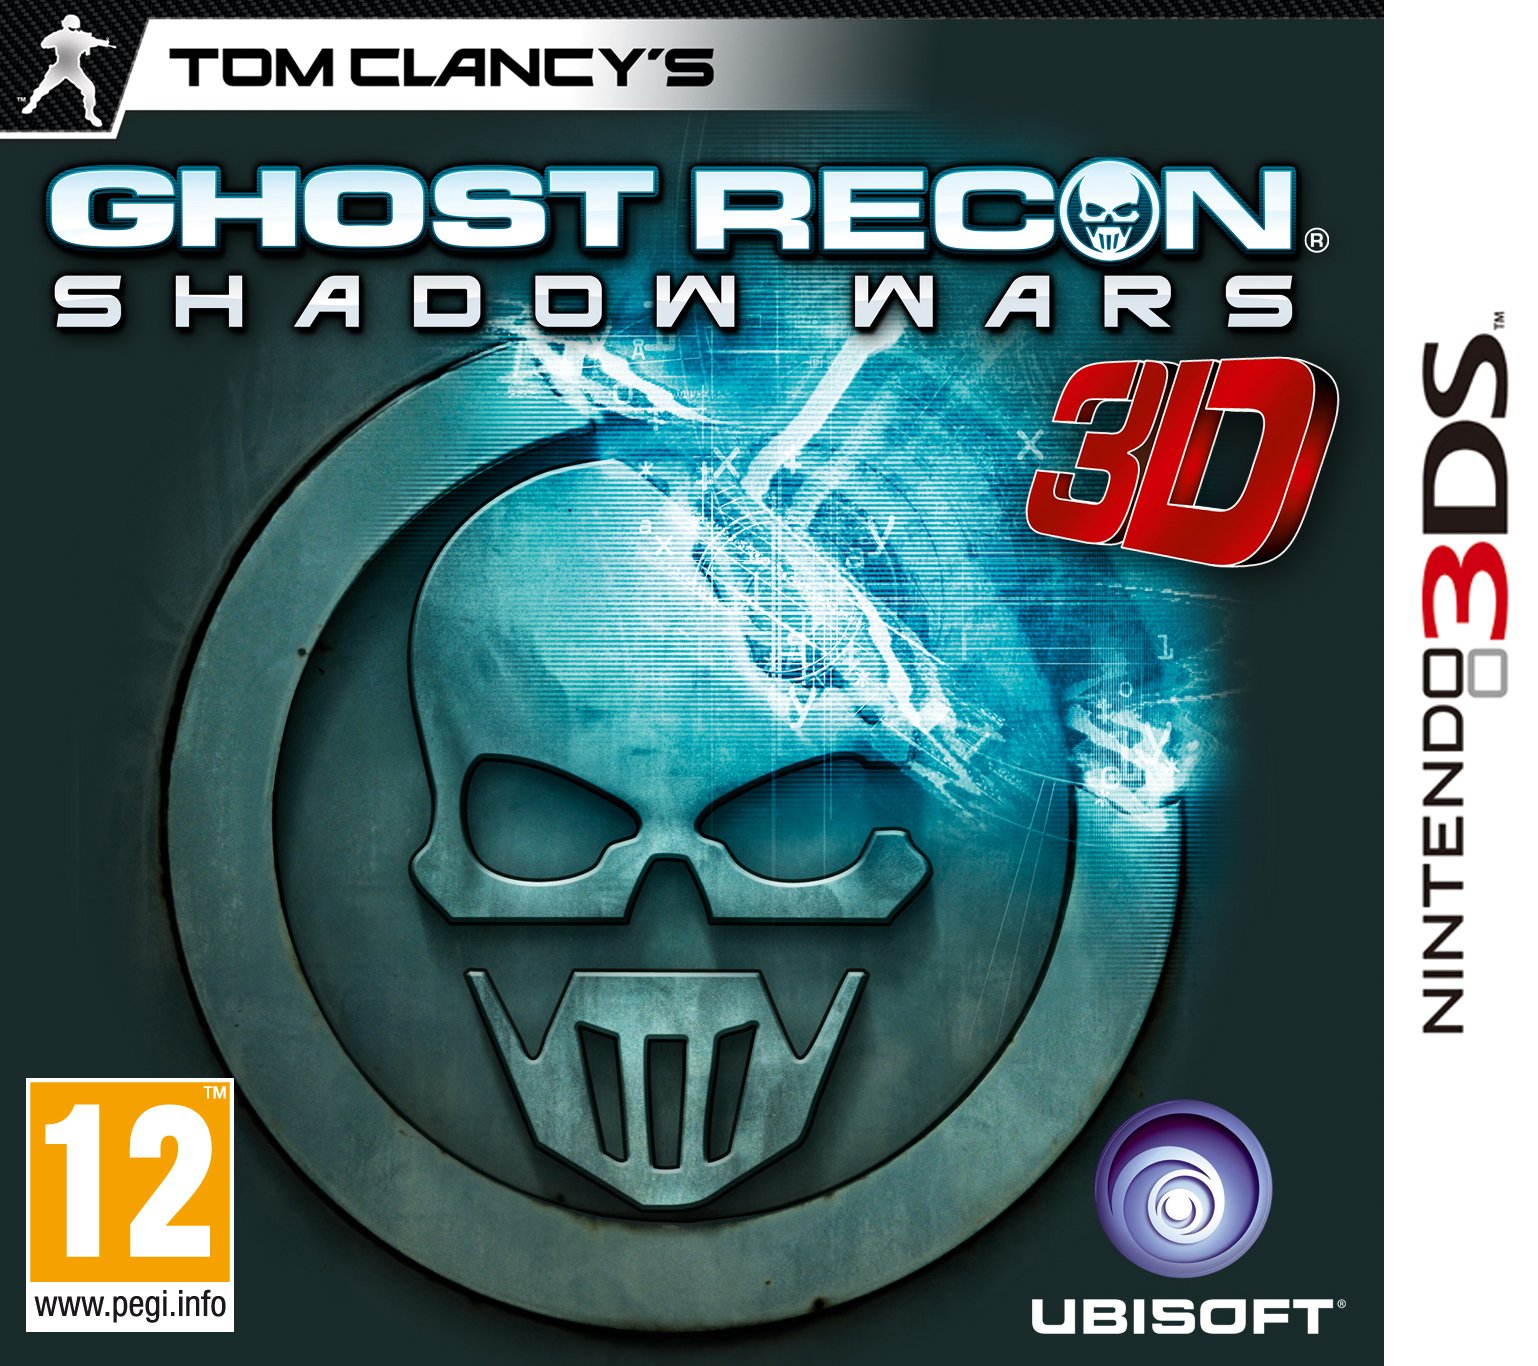 Image of Tom Clancy's Ghost Recon: Shadow Wars